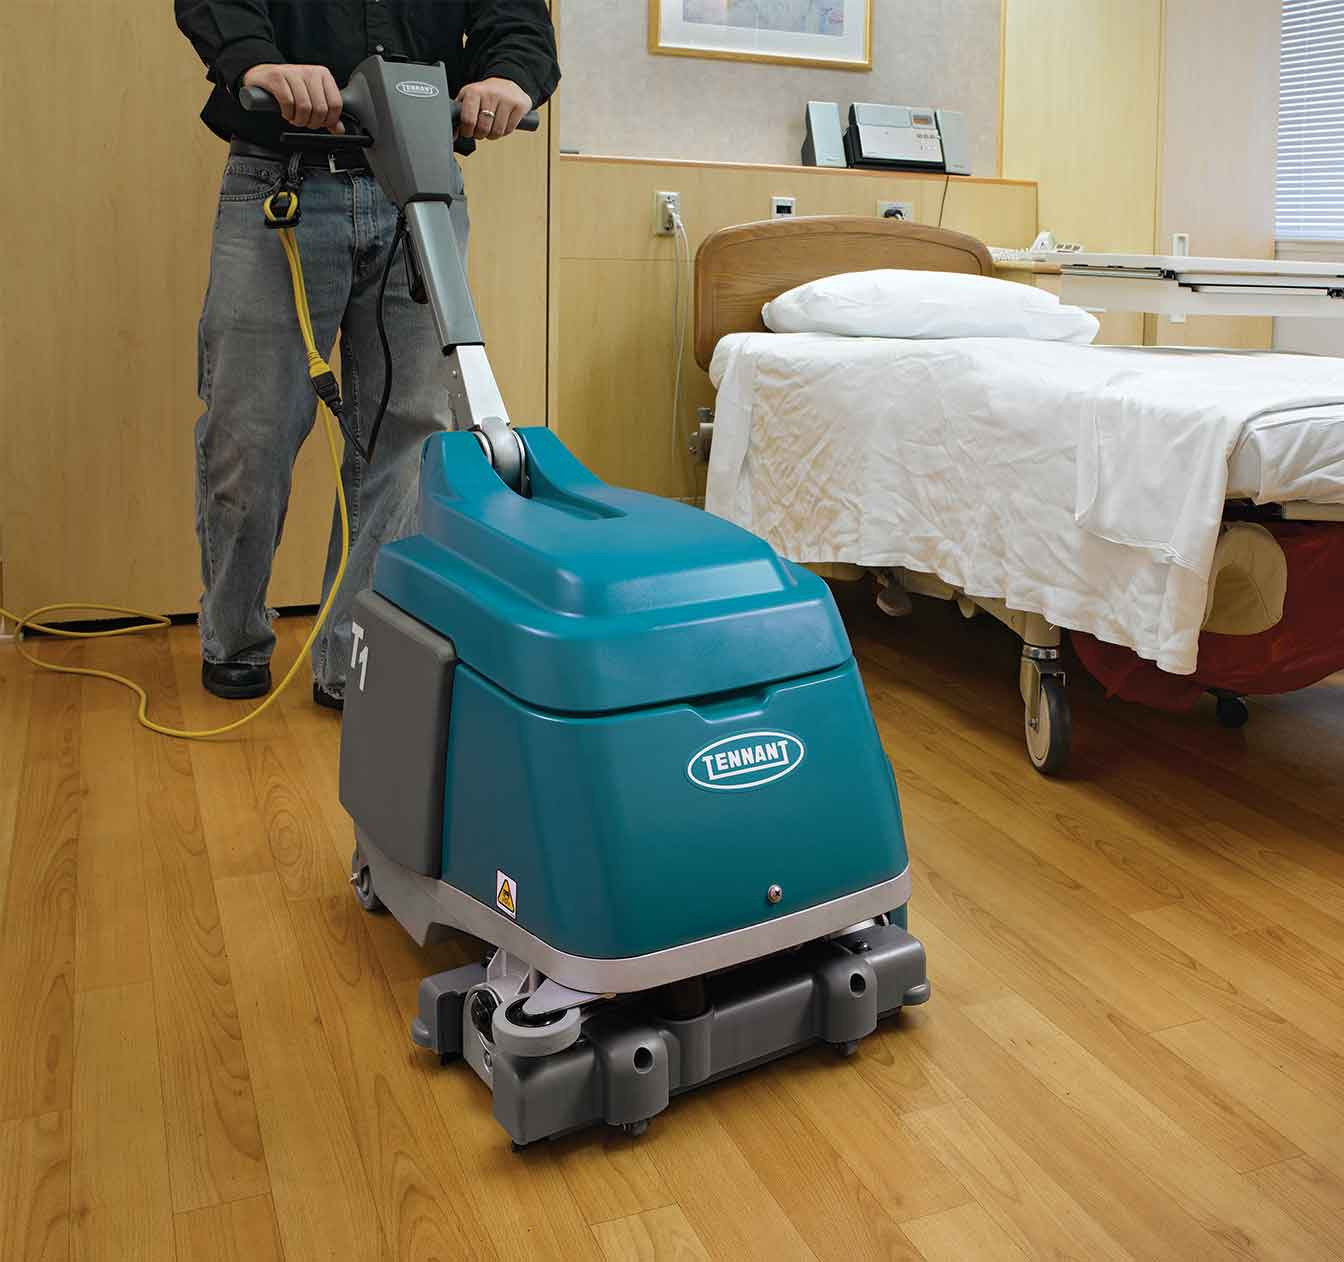 18 Perfect Best Hardwood Floor Vacuum Under $100 2022 free download best hardwood floor vacuum under 100 of t1 walk behind micro scrubber tennant company inside enhance facility image